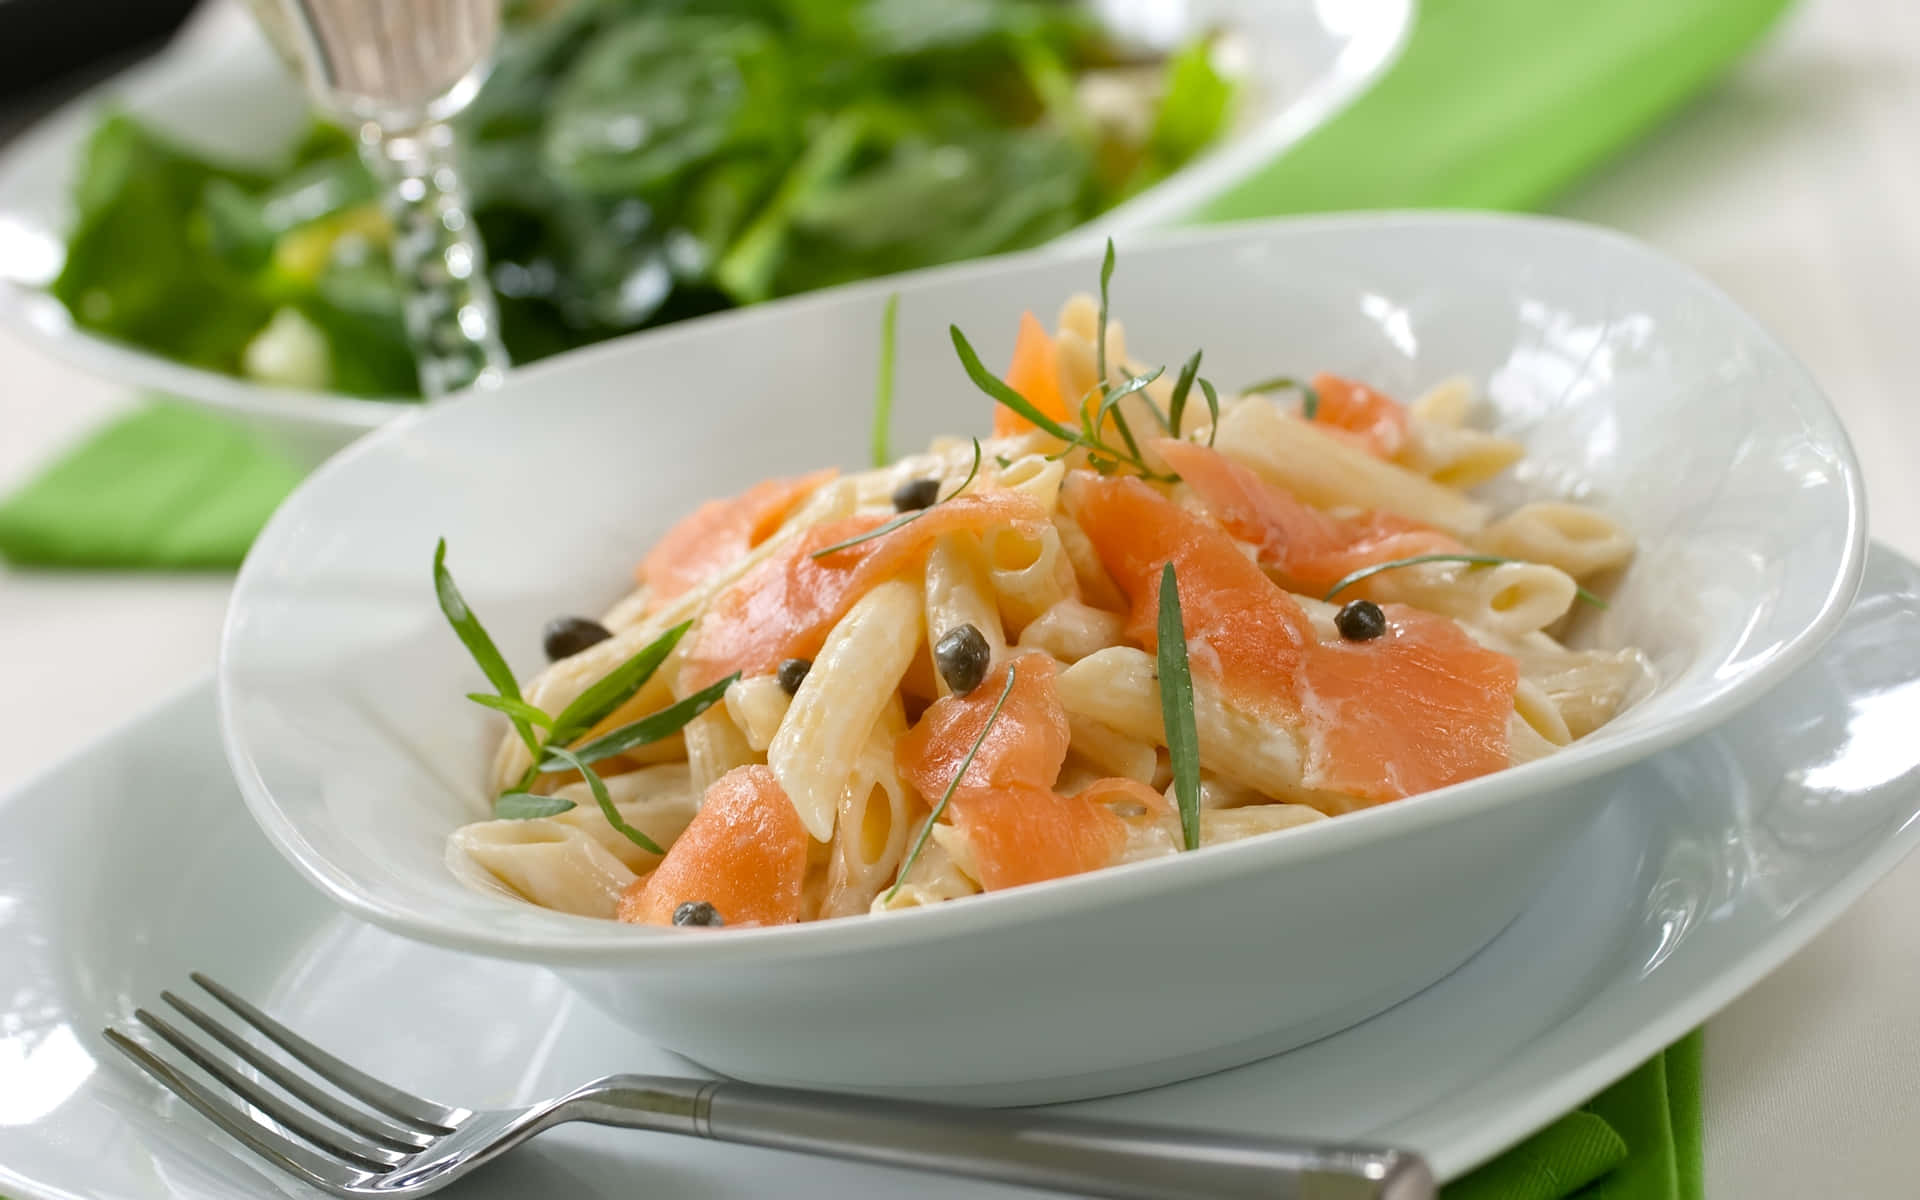 A Bowl Of Pasta With Smoked Salmon And Greens